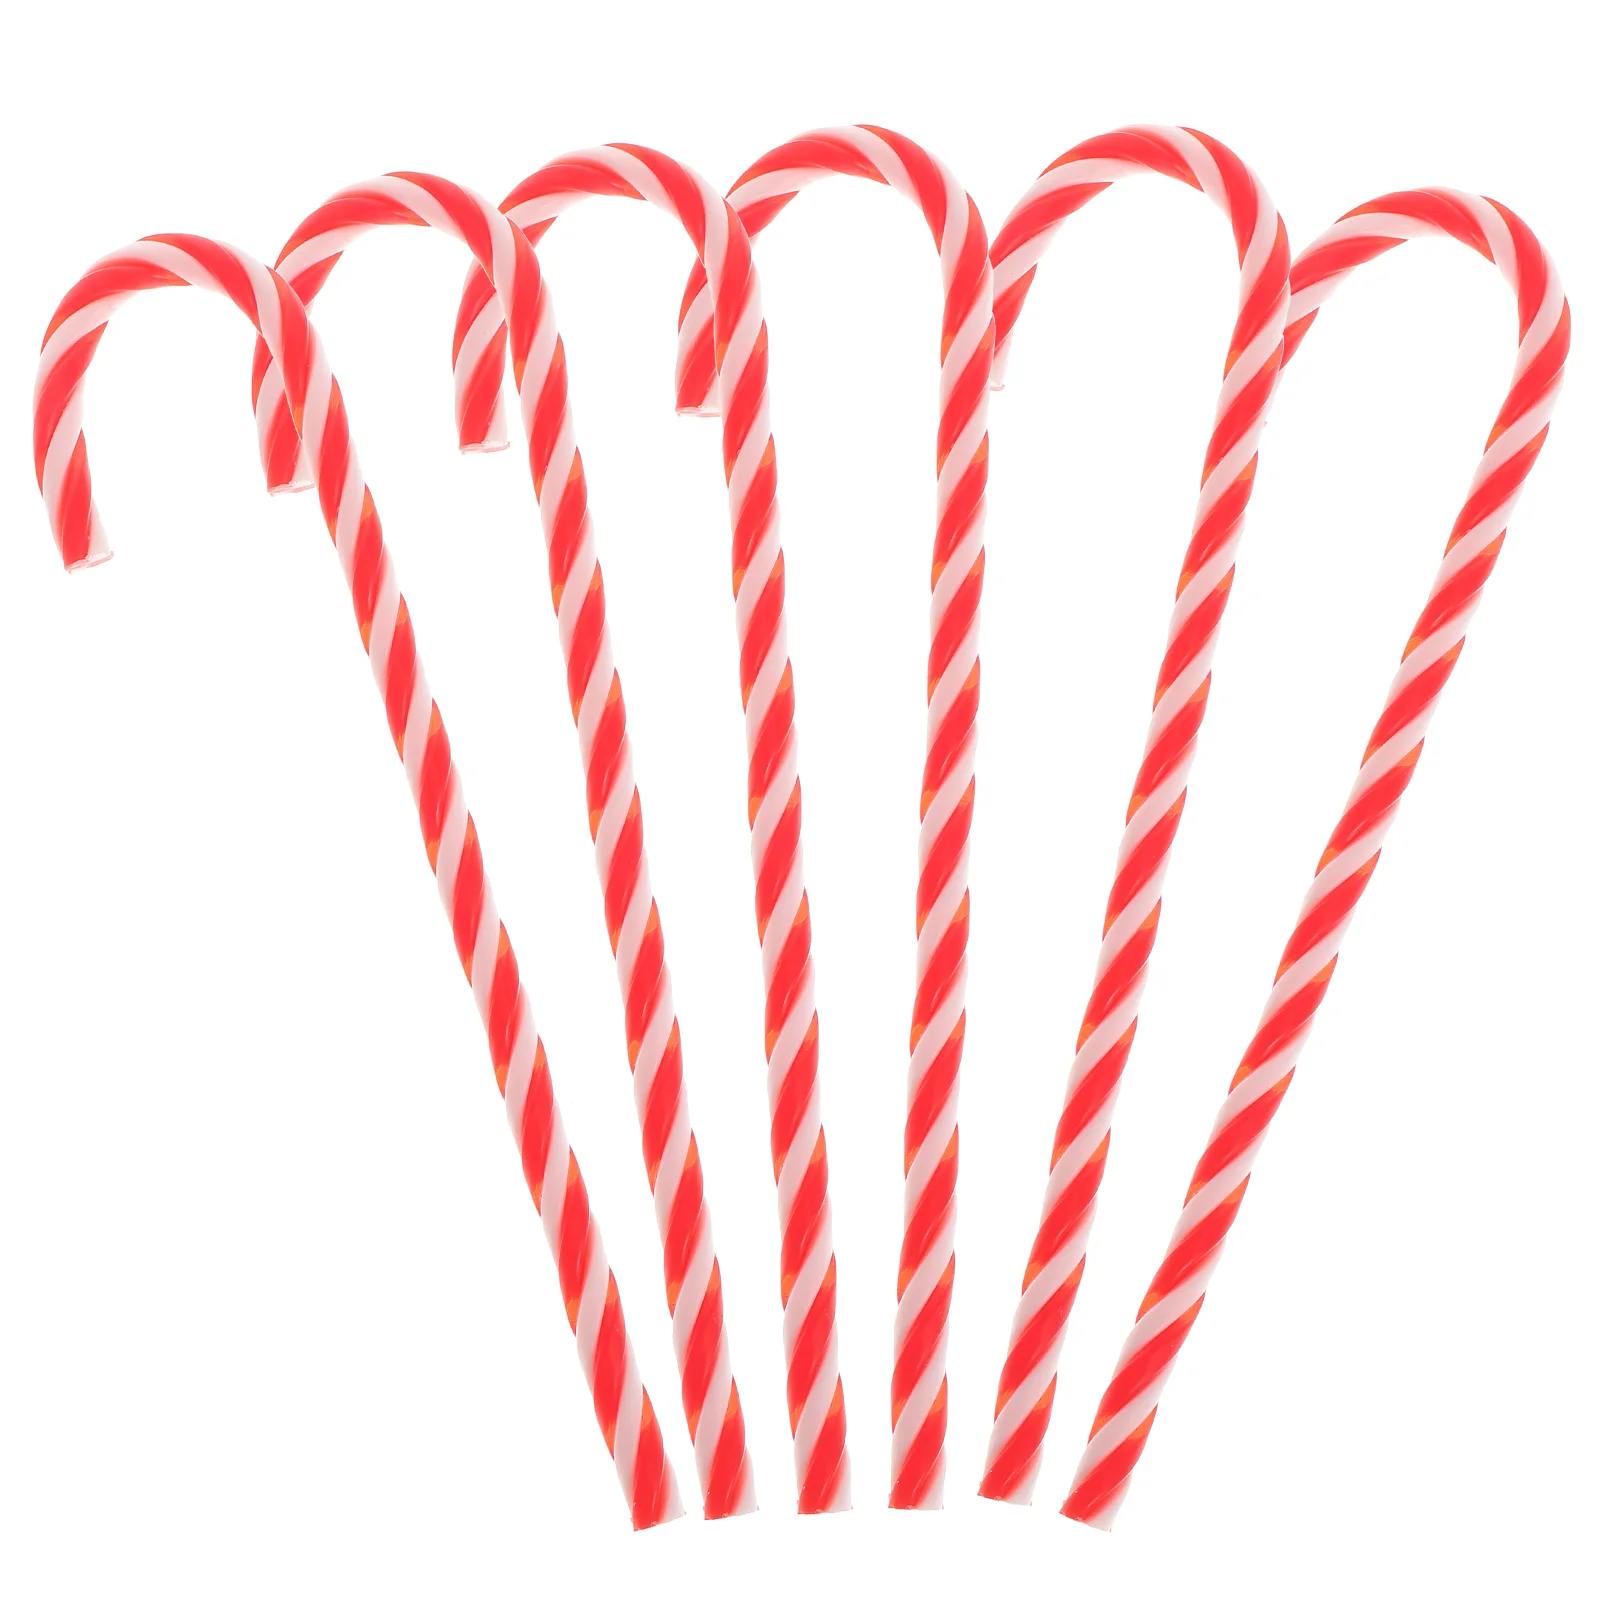 

Christmas Candy Cane Ornaments 6pcs Crutch Hanging Pendant Candy Cane Crafts for Holiday Xmas Tree Wall Fireplace Window